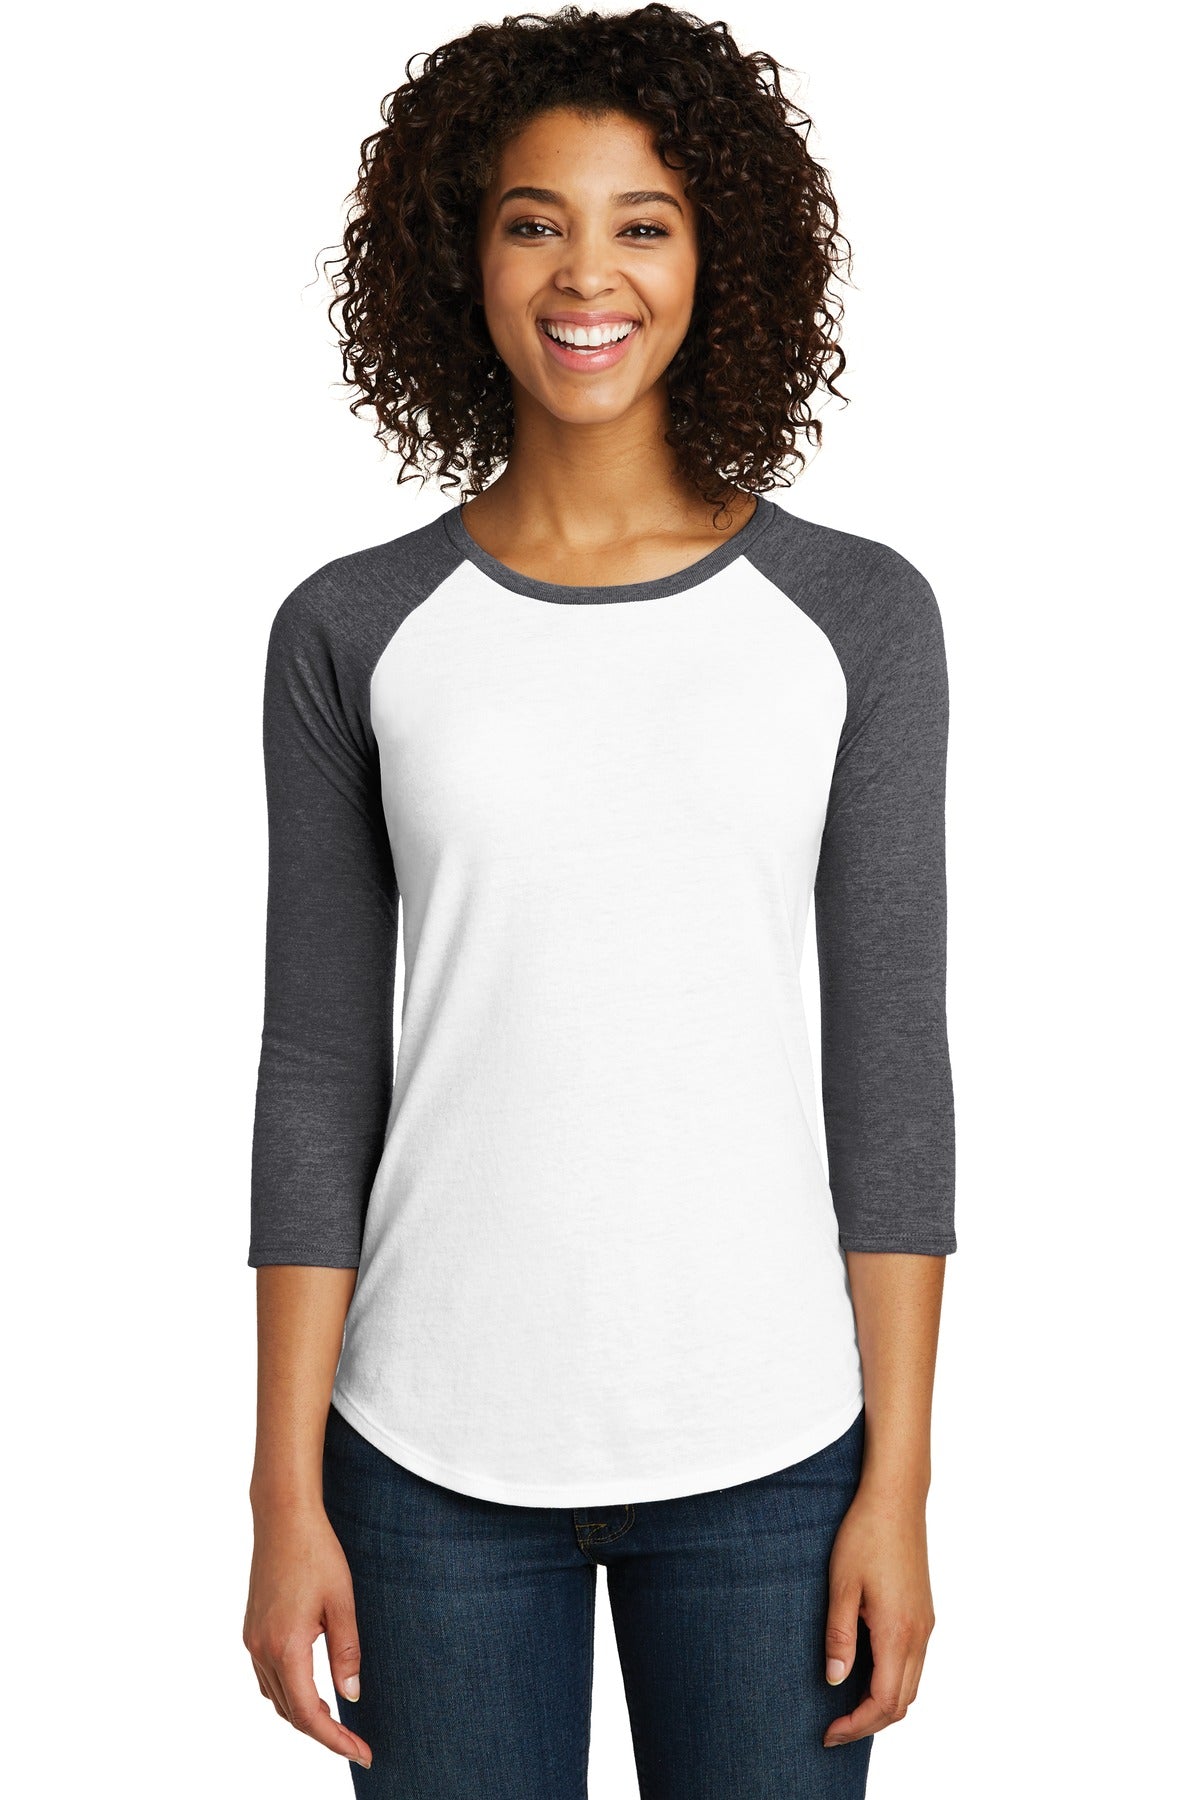 District Women's Very Important Tee Long Sleeve V-Neck, Product